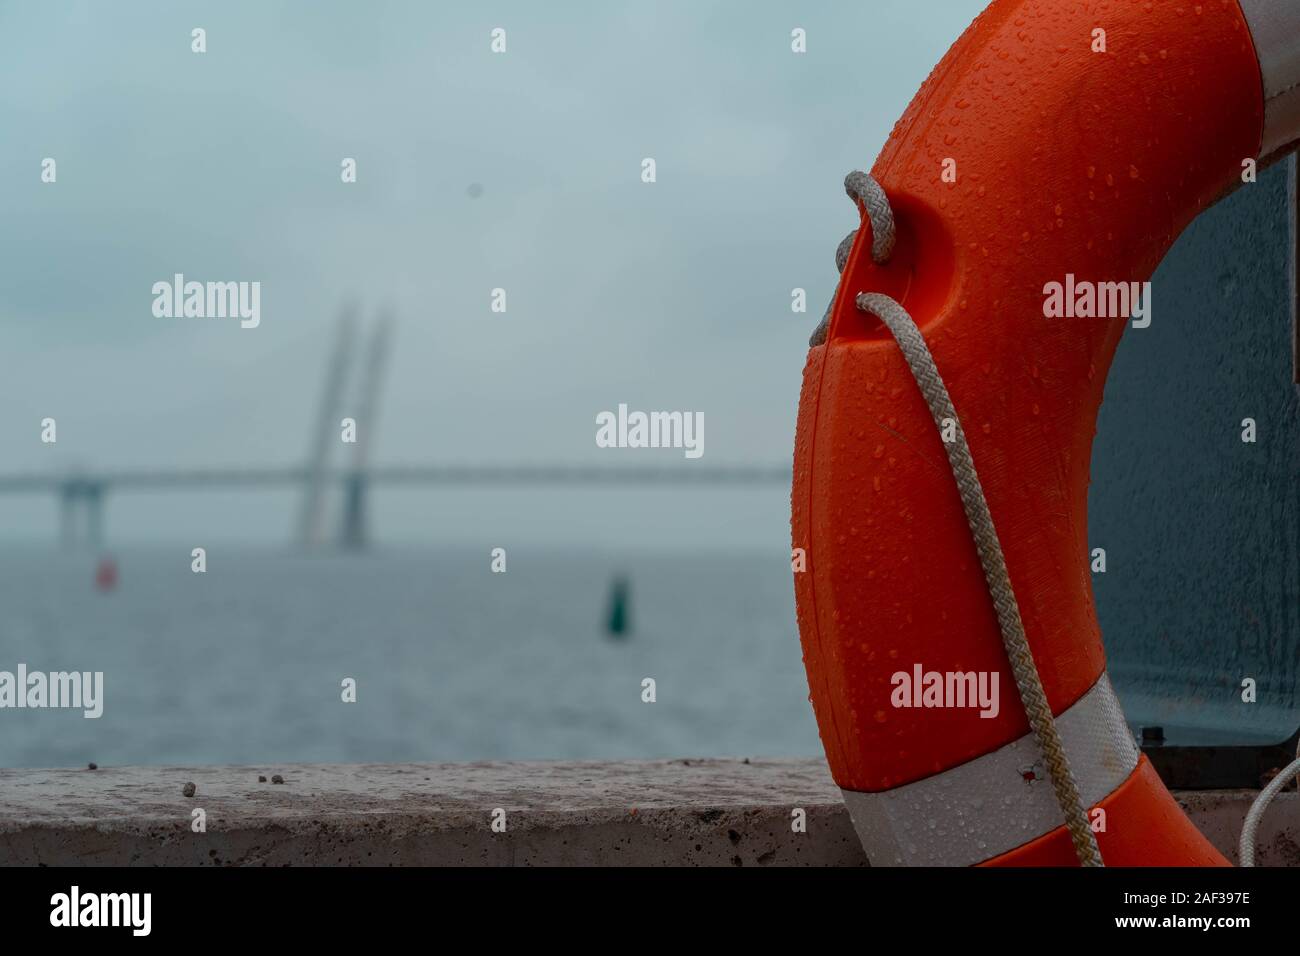 View on Cable-stayed Big Bridge Over the River in Saint Petersburg. Russia Through Lifebuoy. Bridge is on Background and Blurred, Orange Lifebuoy Is o Stock Photo